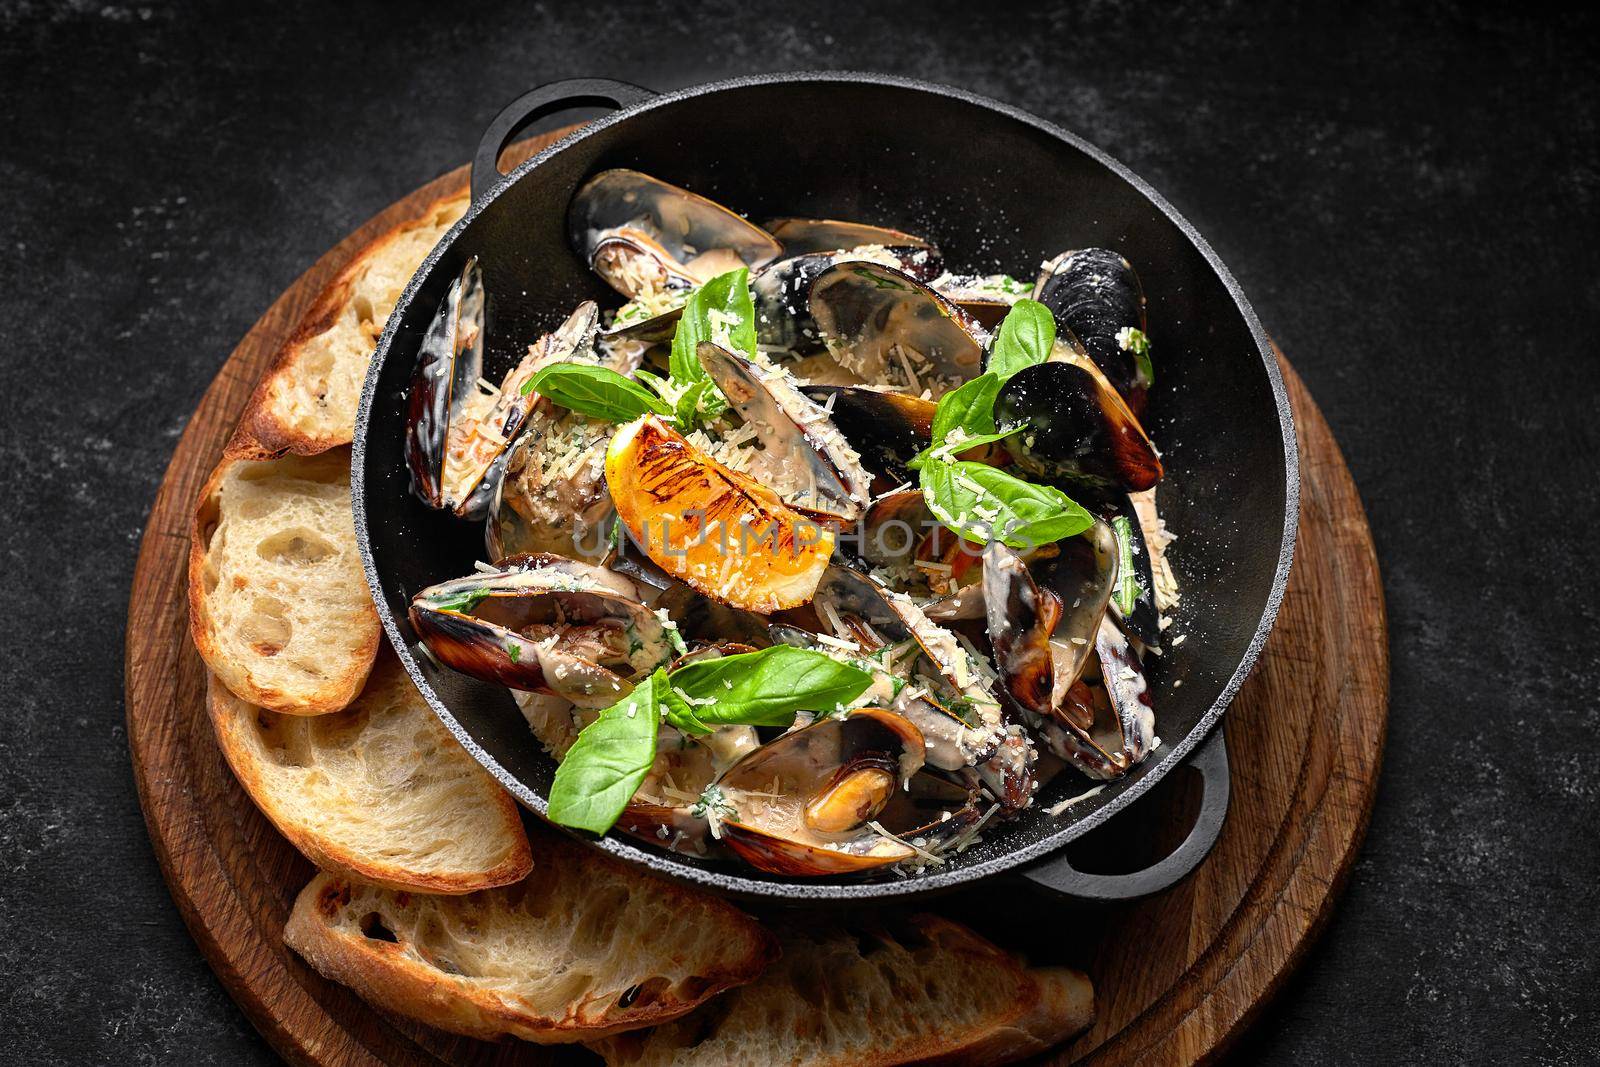 Cooked mussels in a skillet with cheese and basil leaves, on a wooden board, on a dark background